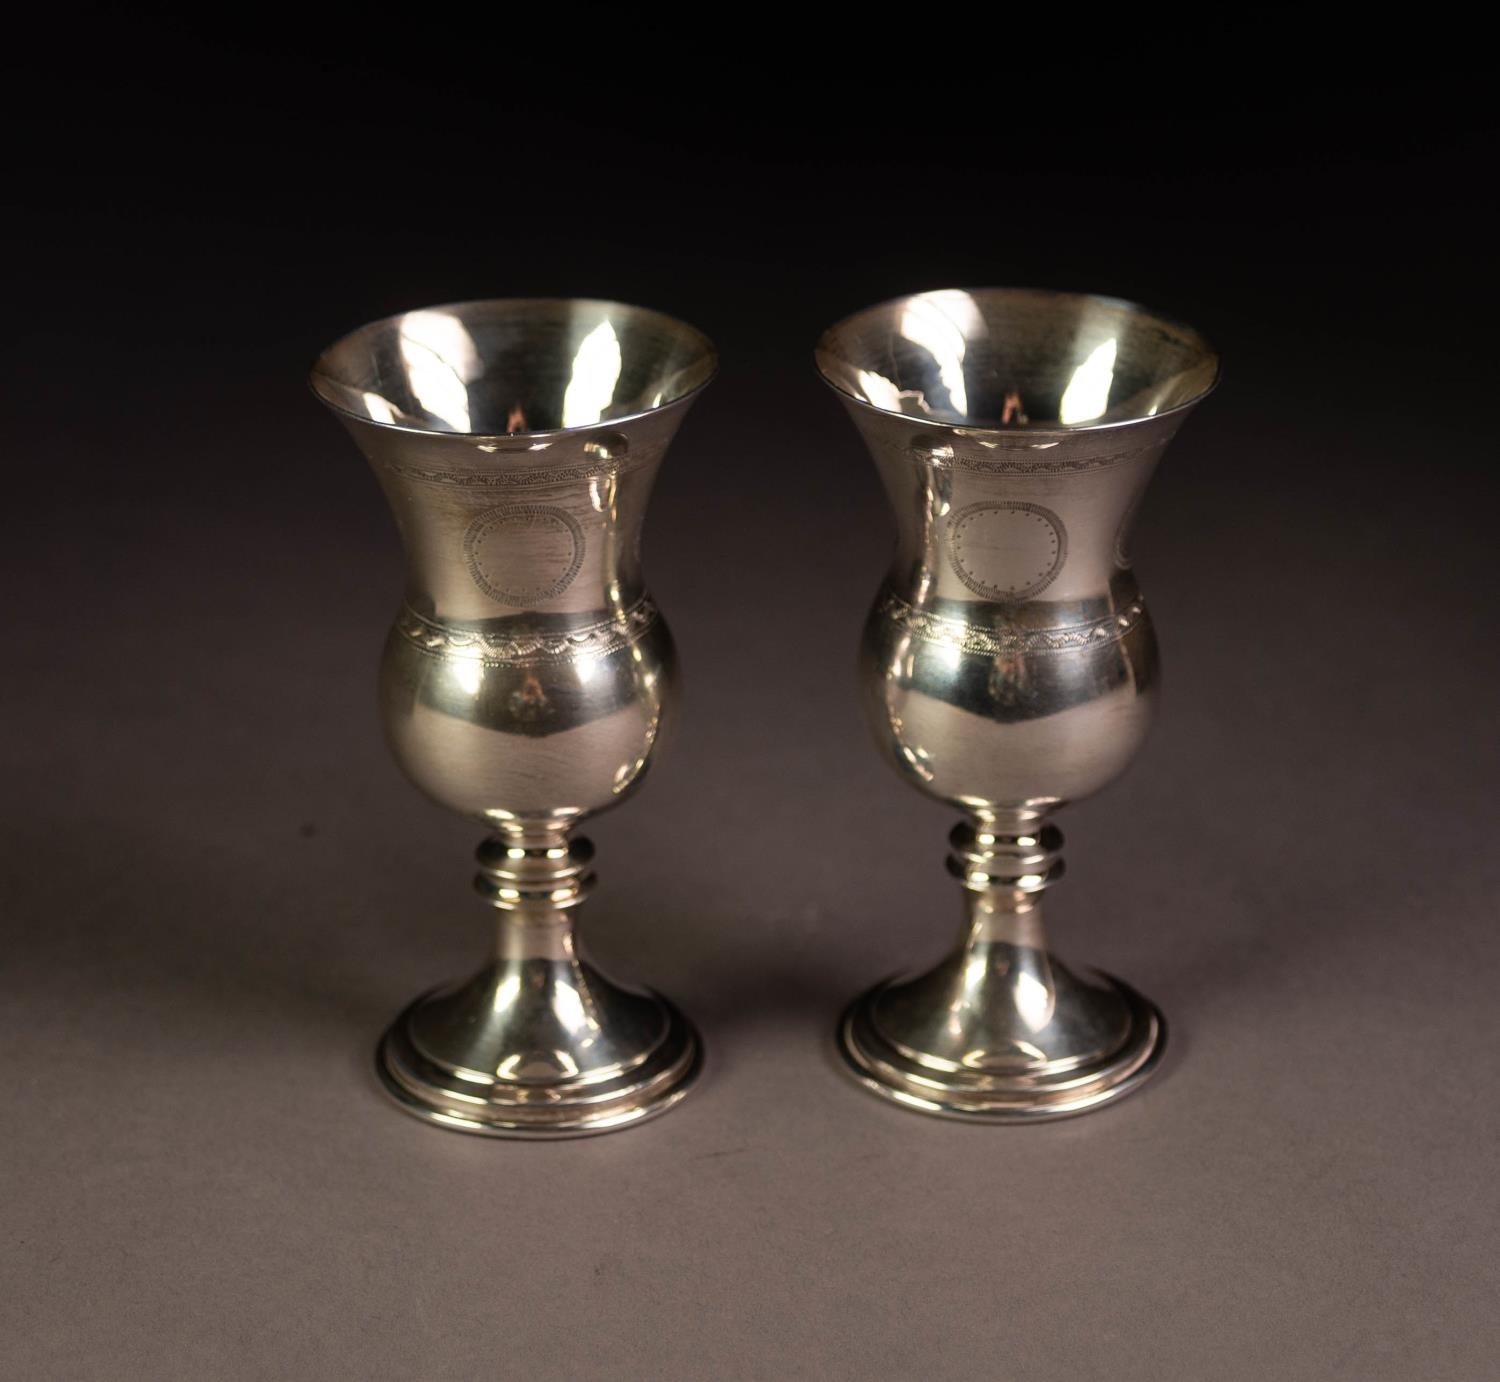 PAIR OF WRIGGLE ENGRAVED SILVER SMALL WINE GOBLETS, each with thistle shaped bowl, knopped stem